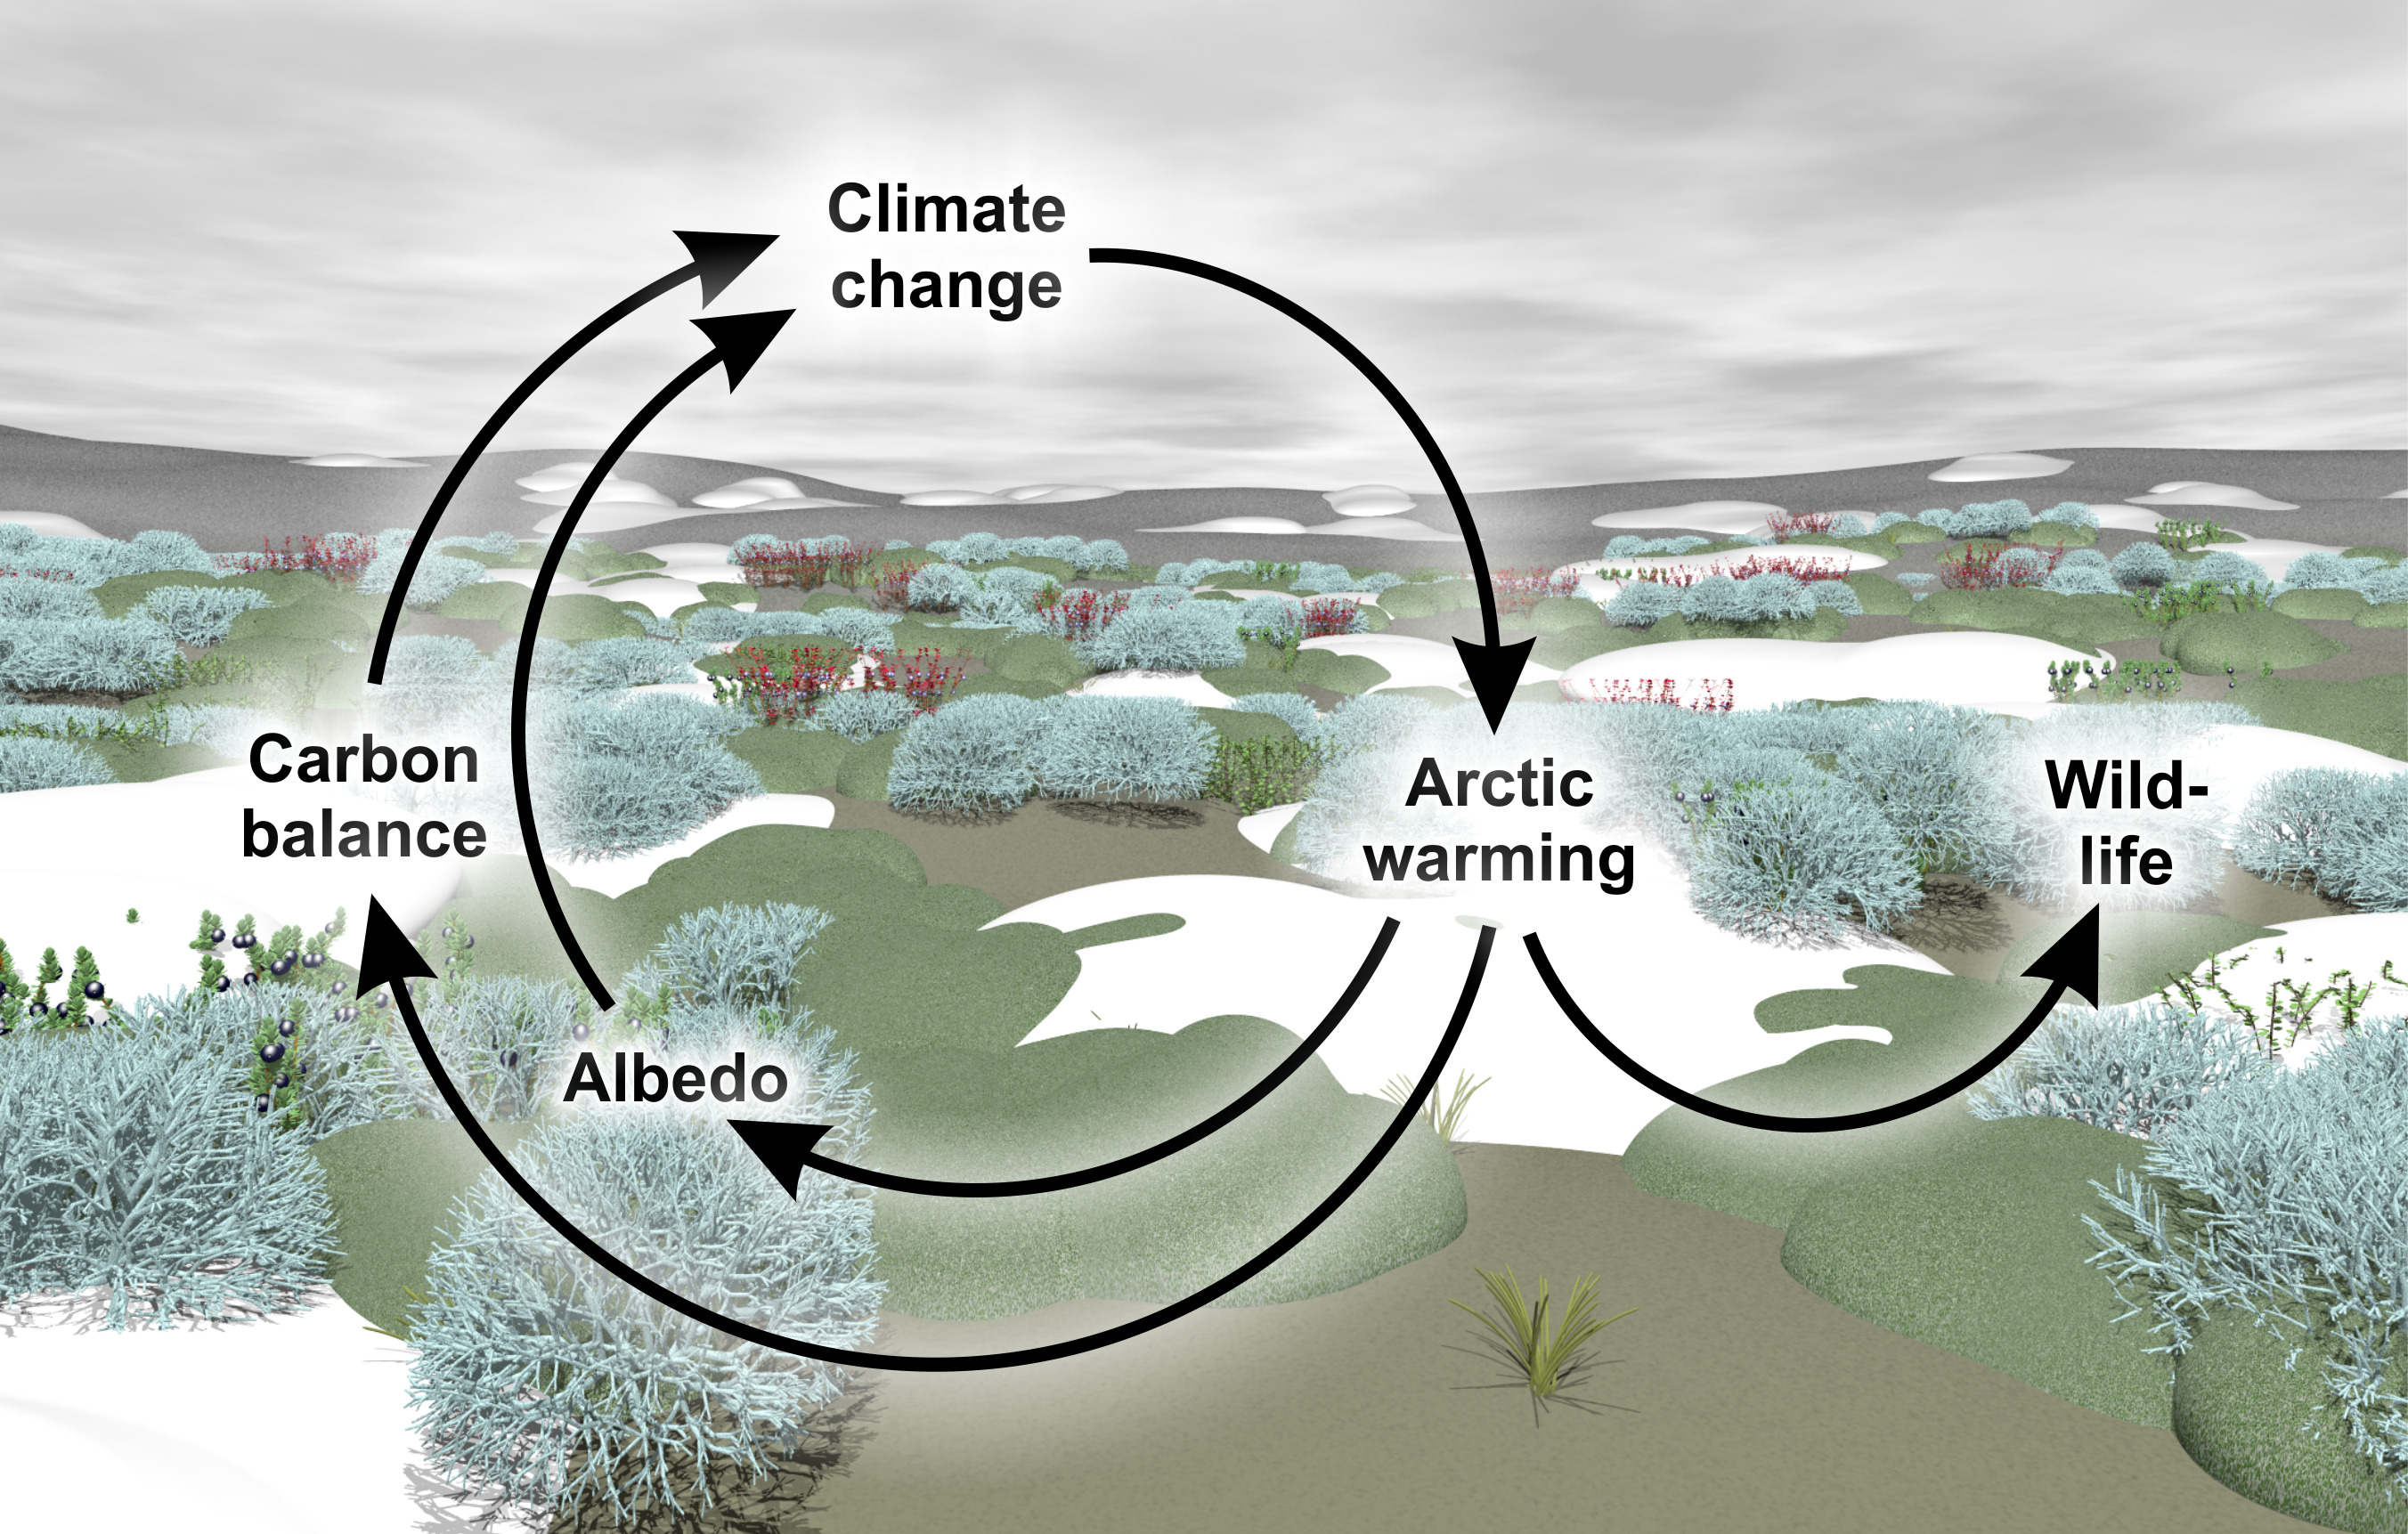 The tundra biome - a hotspot of climate change